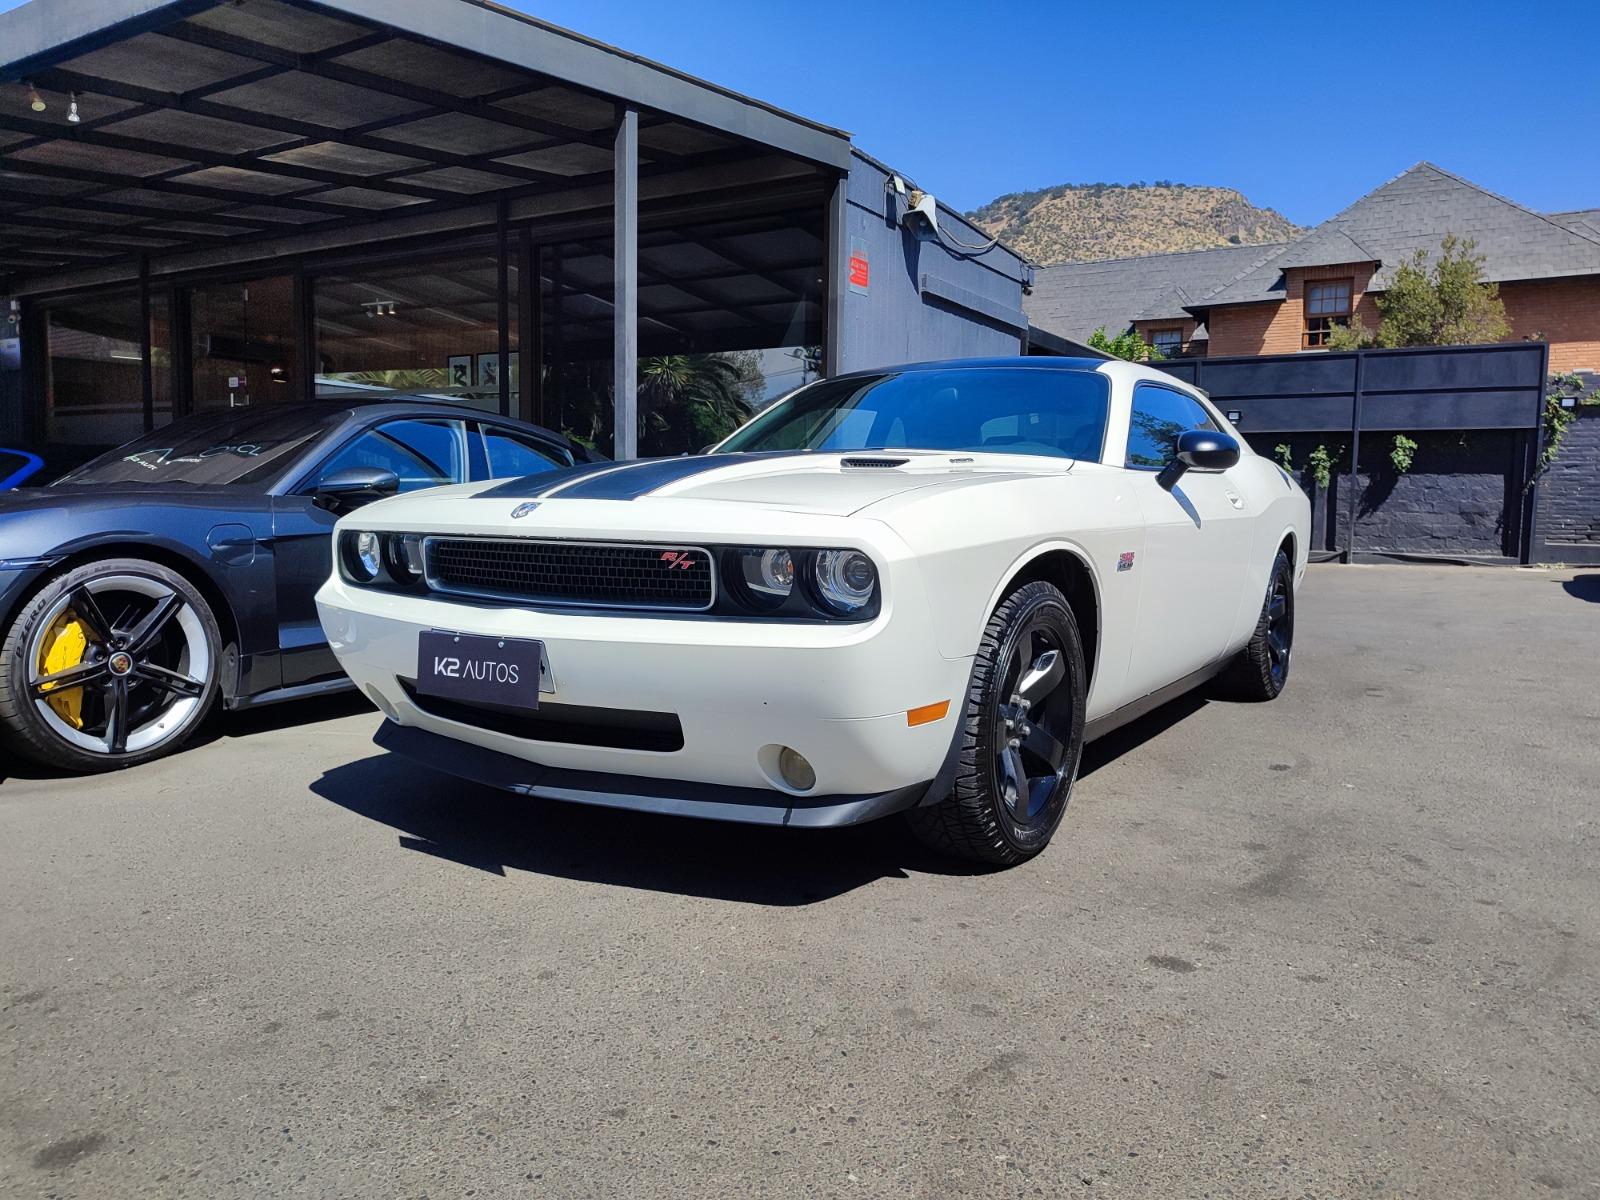 DODGE CHALLENGER R/T 5.7L 2010 CLASICO MUSCLE CAR - FULL MOTOR